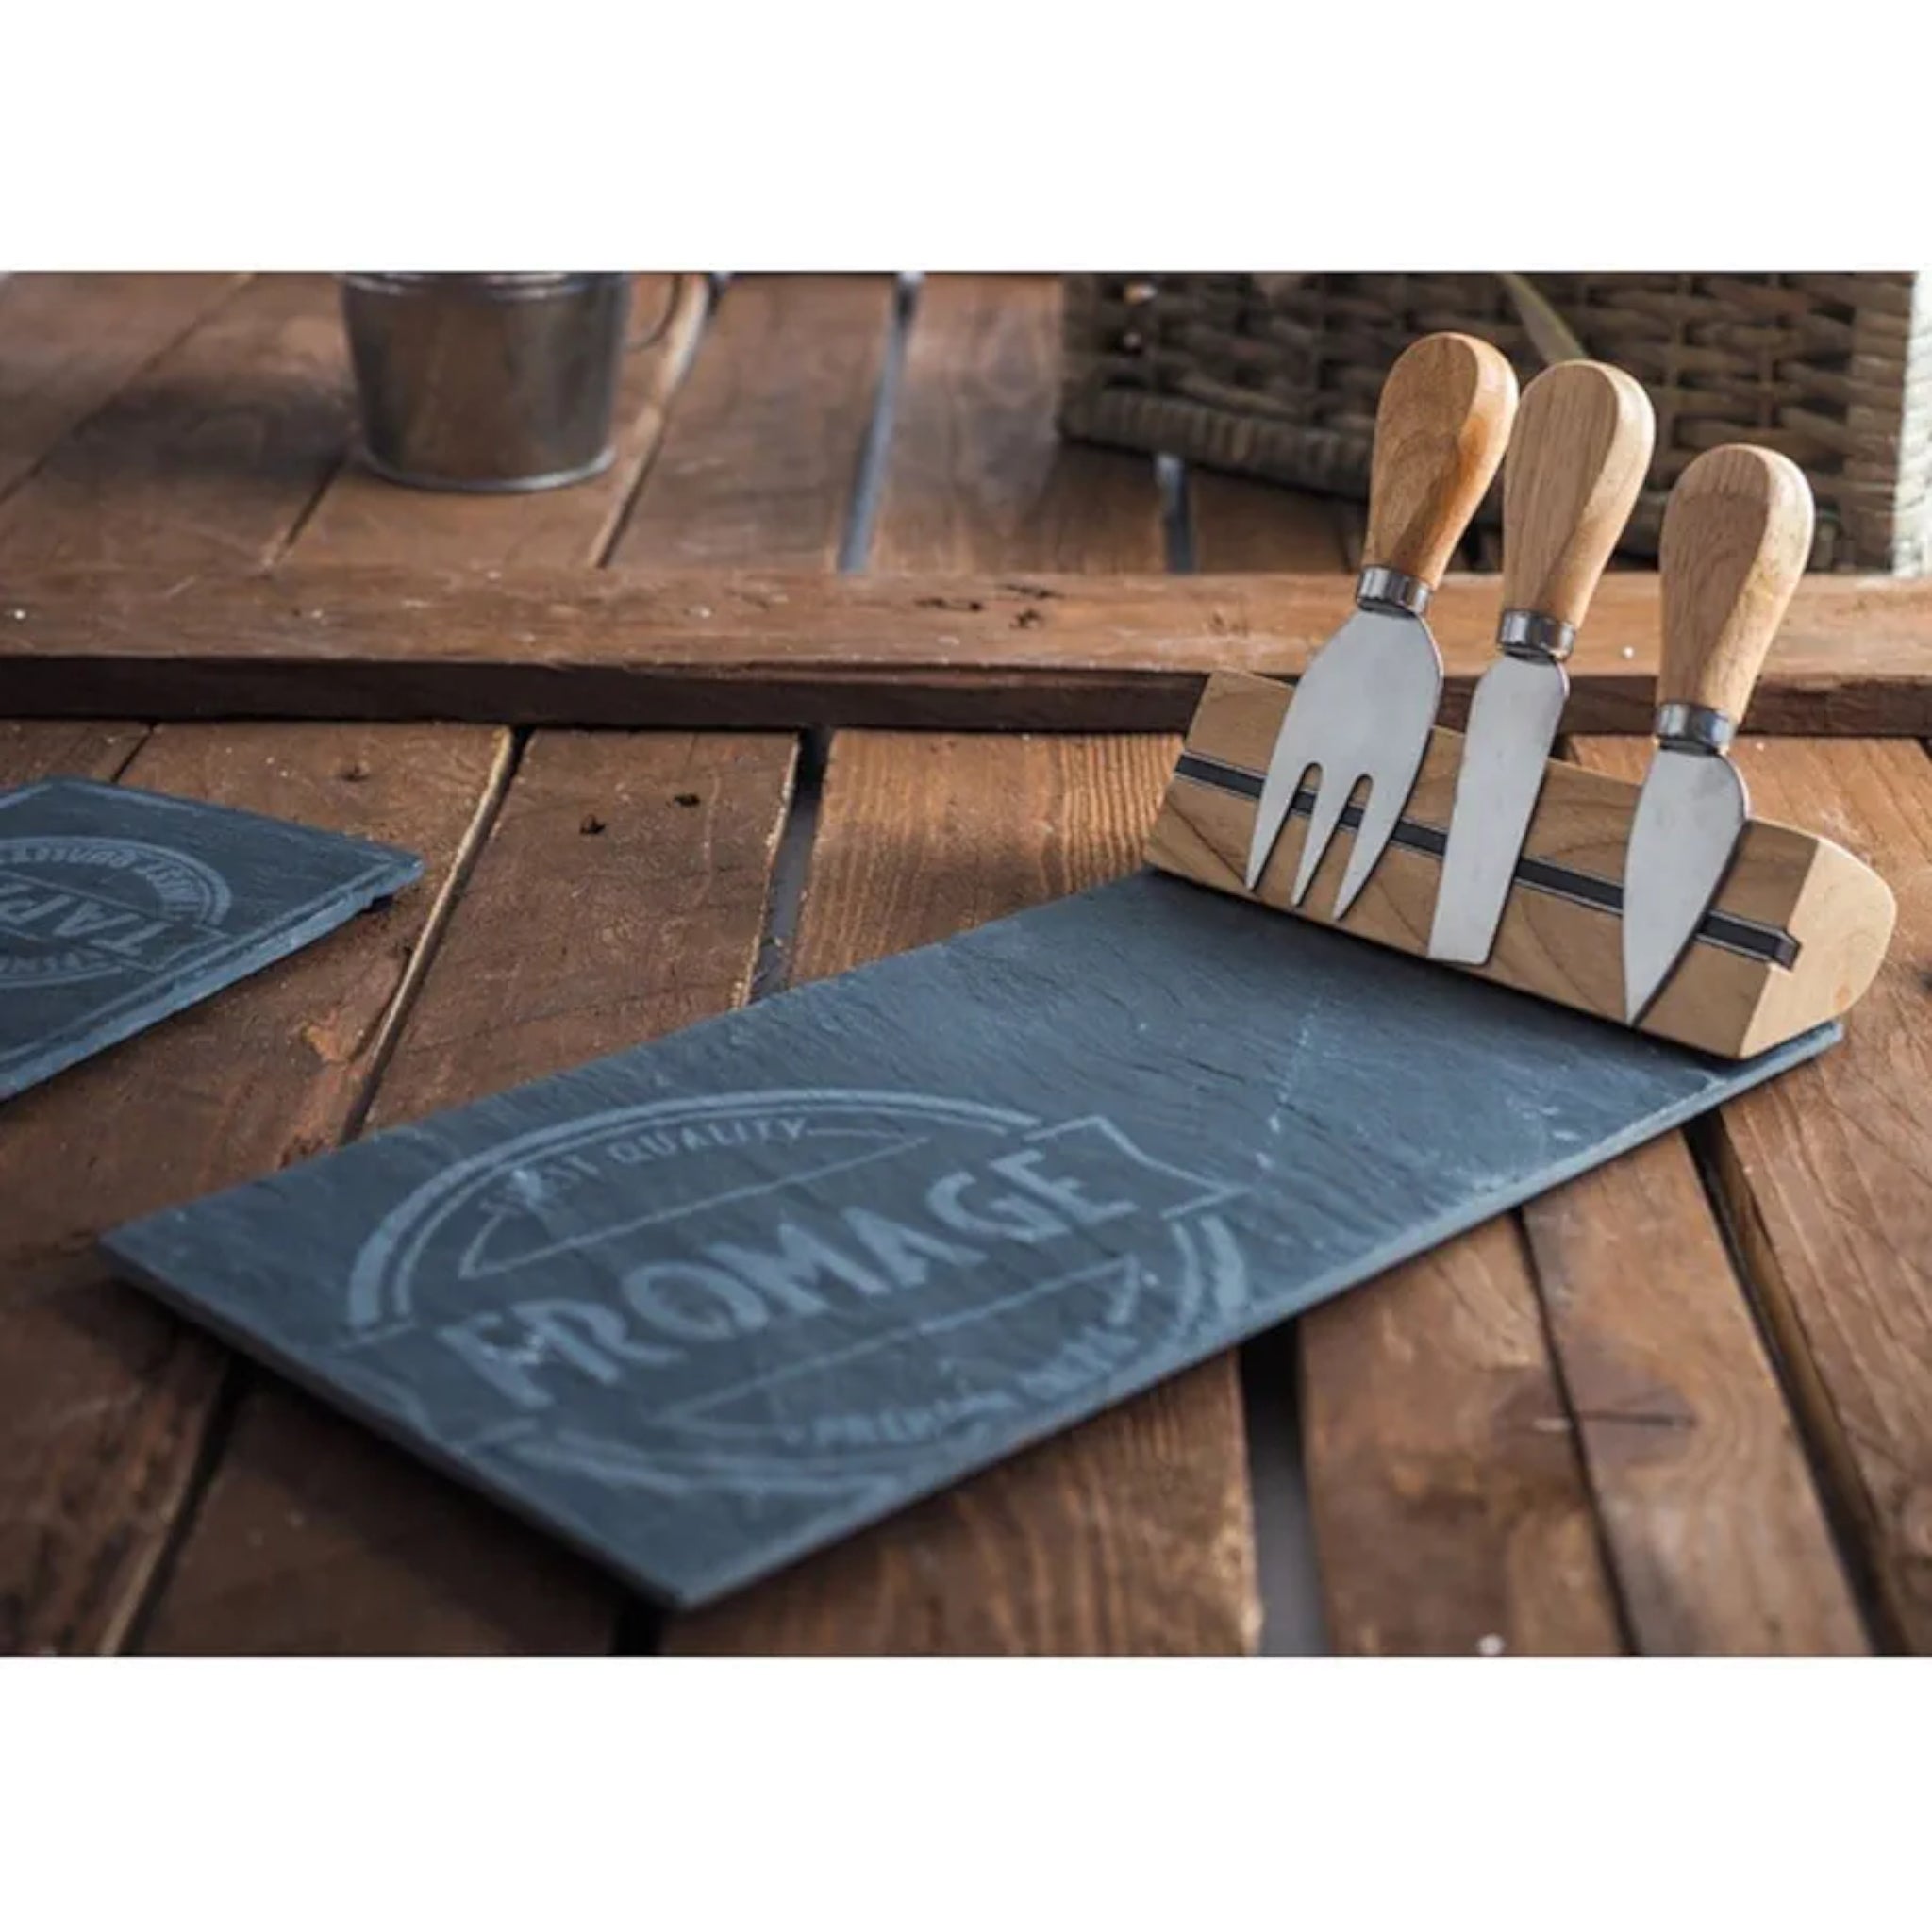 Slate Cheese Serving Board with 3pc Knife Set